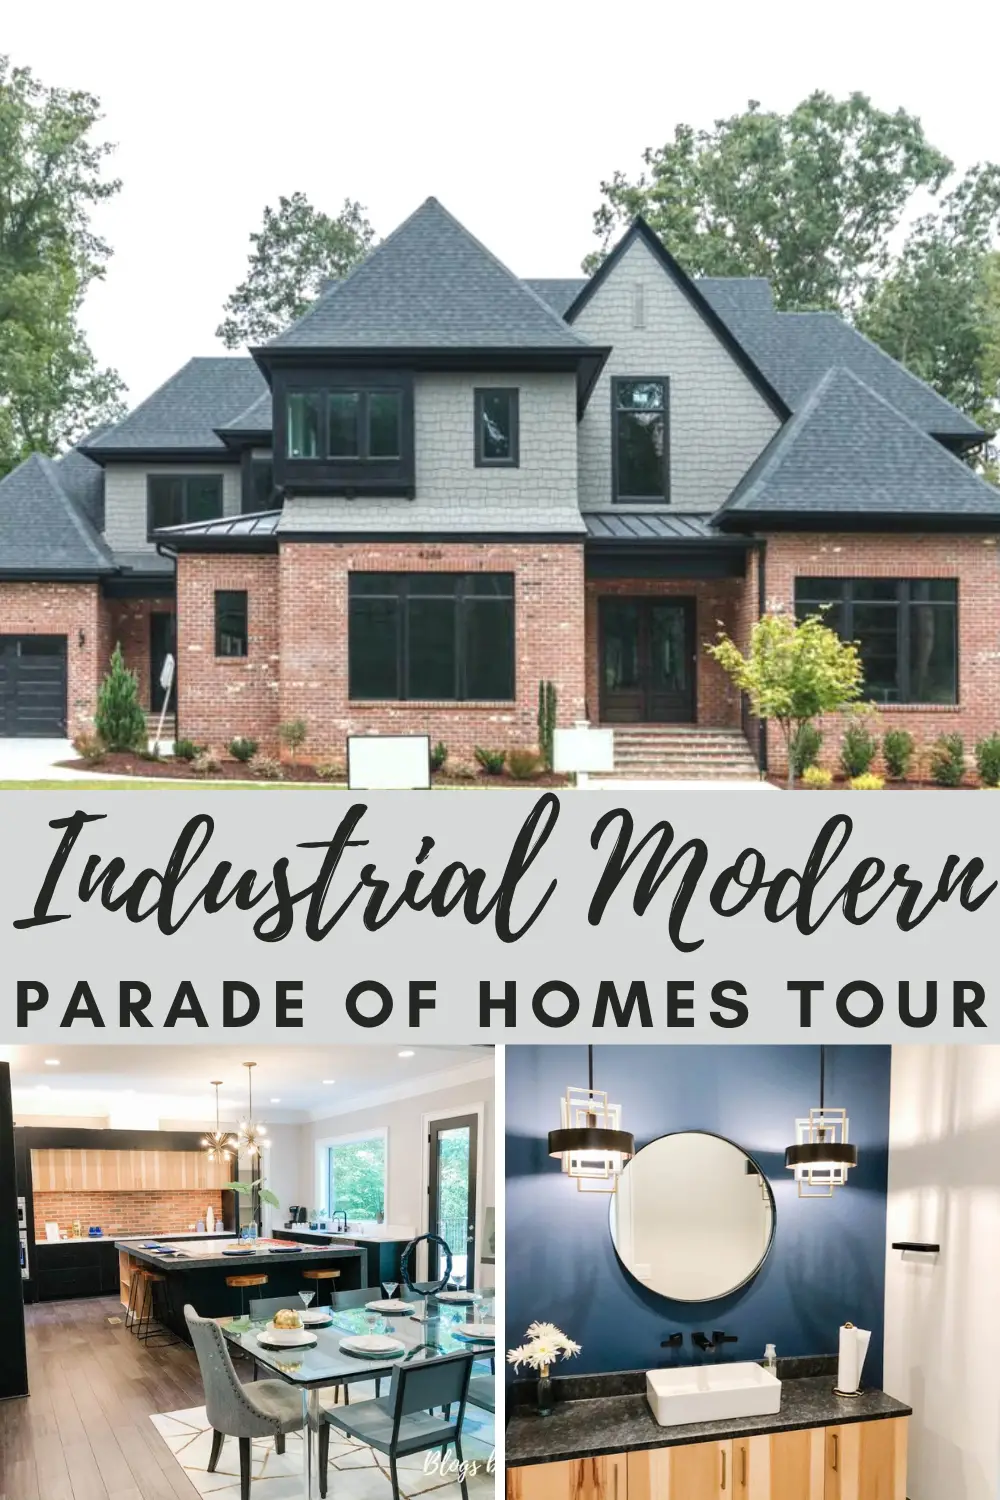 Industrial Modern Parade of Homes Tour